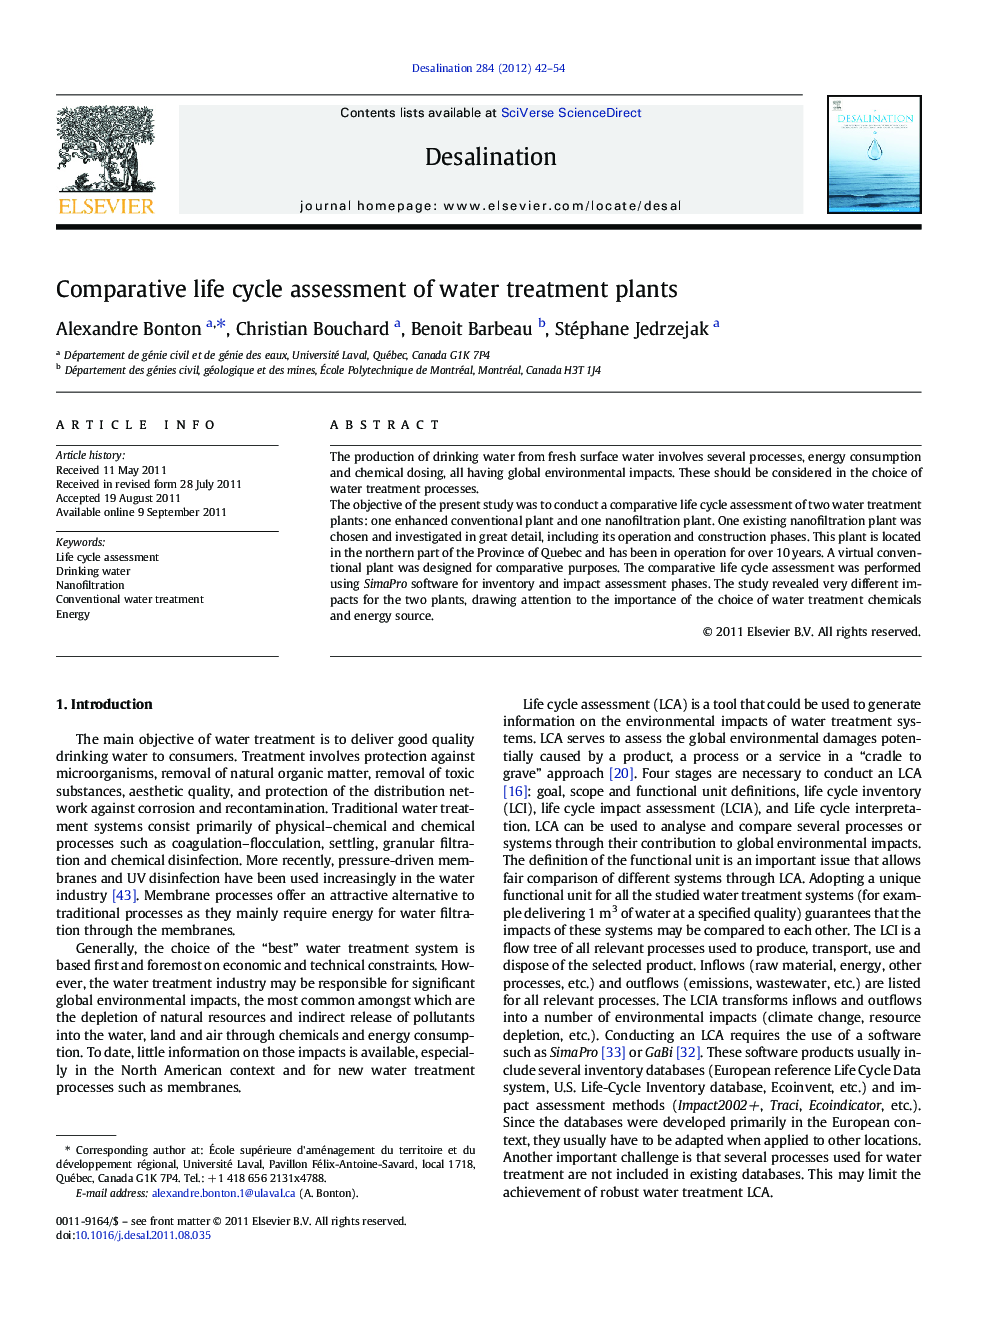 Comparative life cycle assessment of water treatment plants